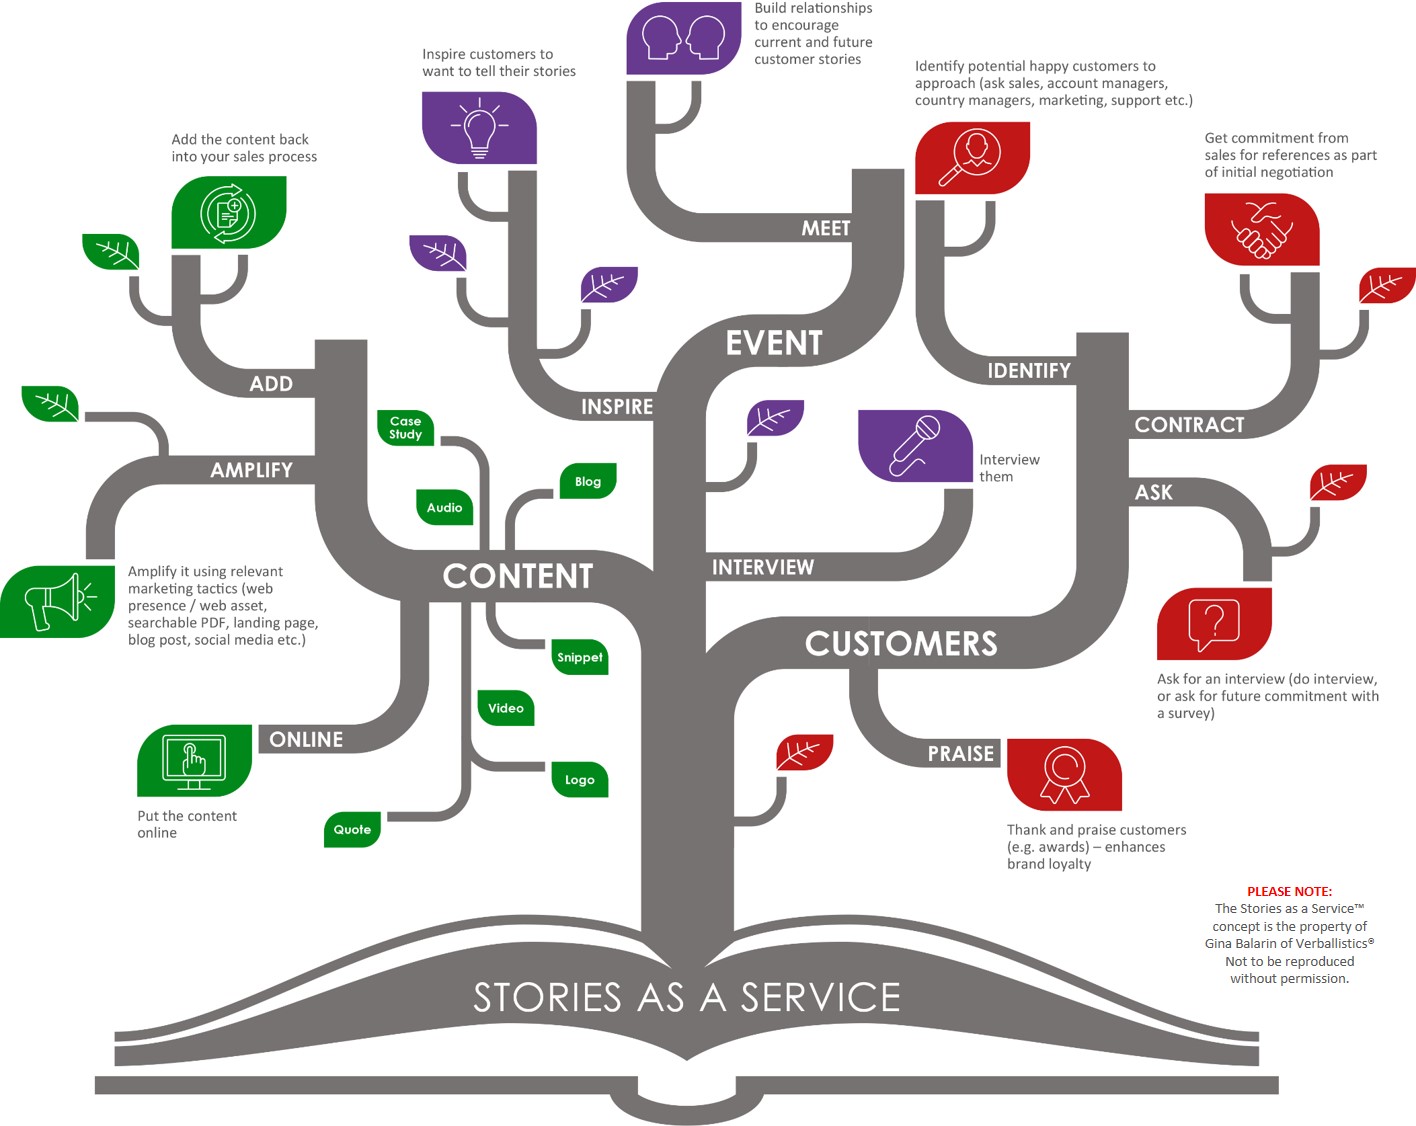 This is the Stories as a Service diagram designed by Gina Balarin of Verballistics